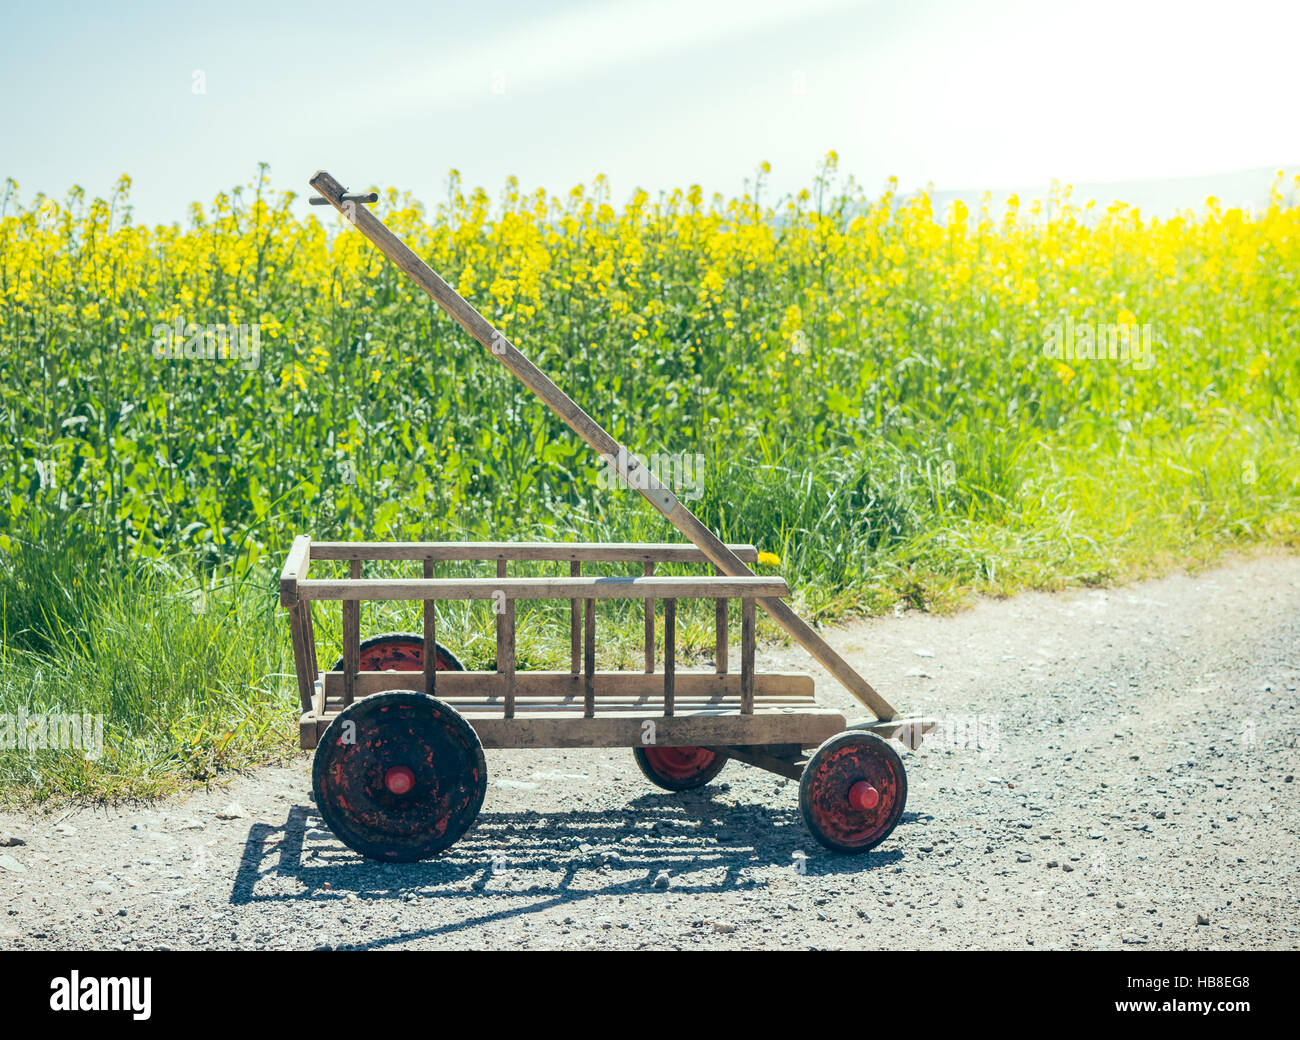 handcart on a dirt road Stock Photo